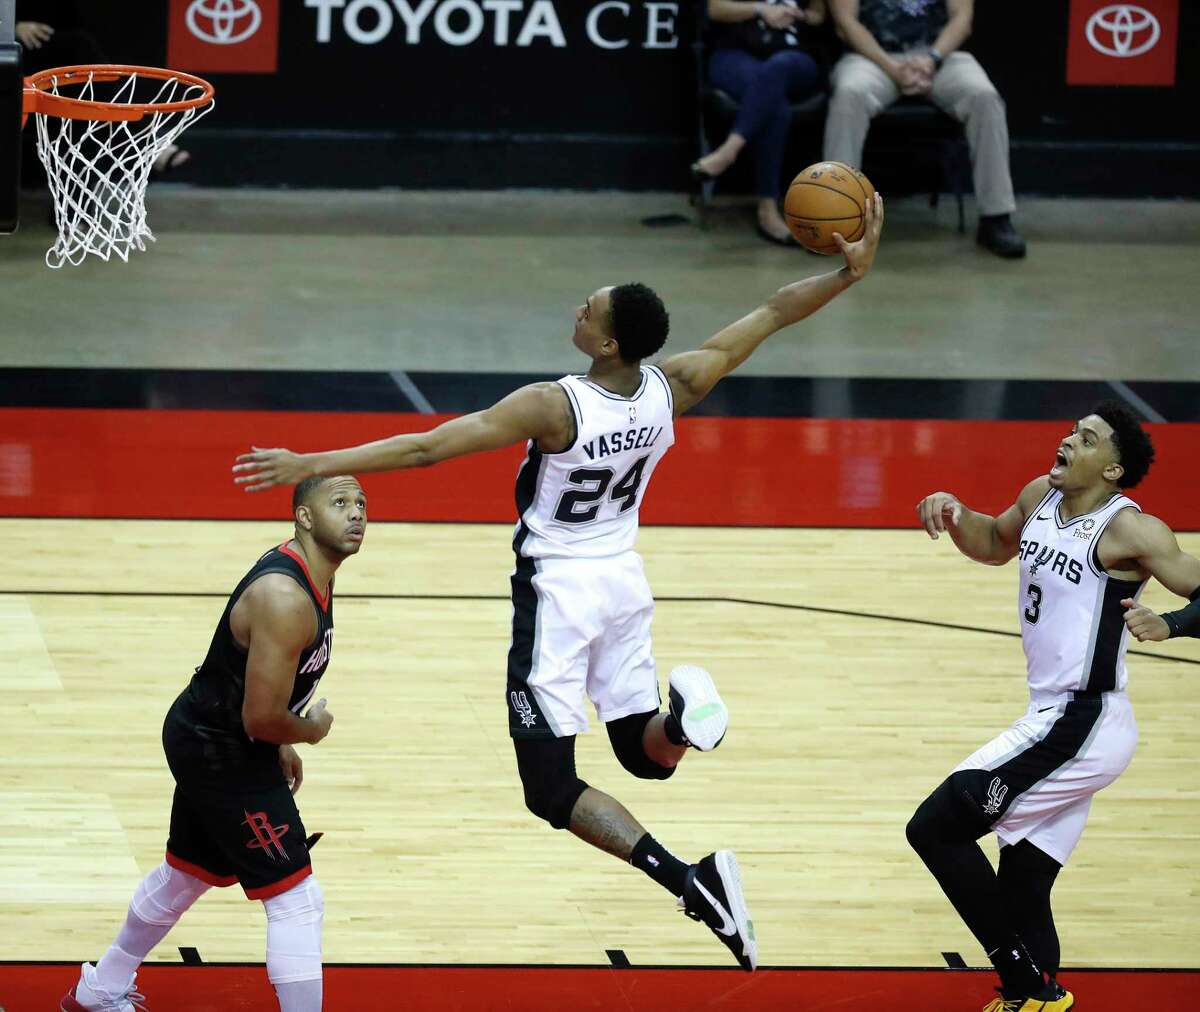 Spurs guard Devin Vassell dunks the ball against the Rockets in a recent game. The Rockets are allowing 118.5 points per game with a defensive rating that ranks 25th in the NBA.